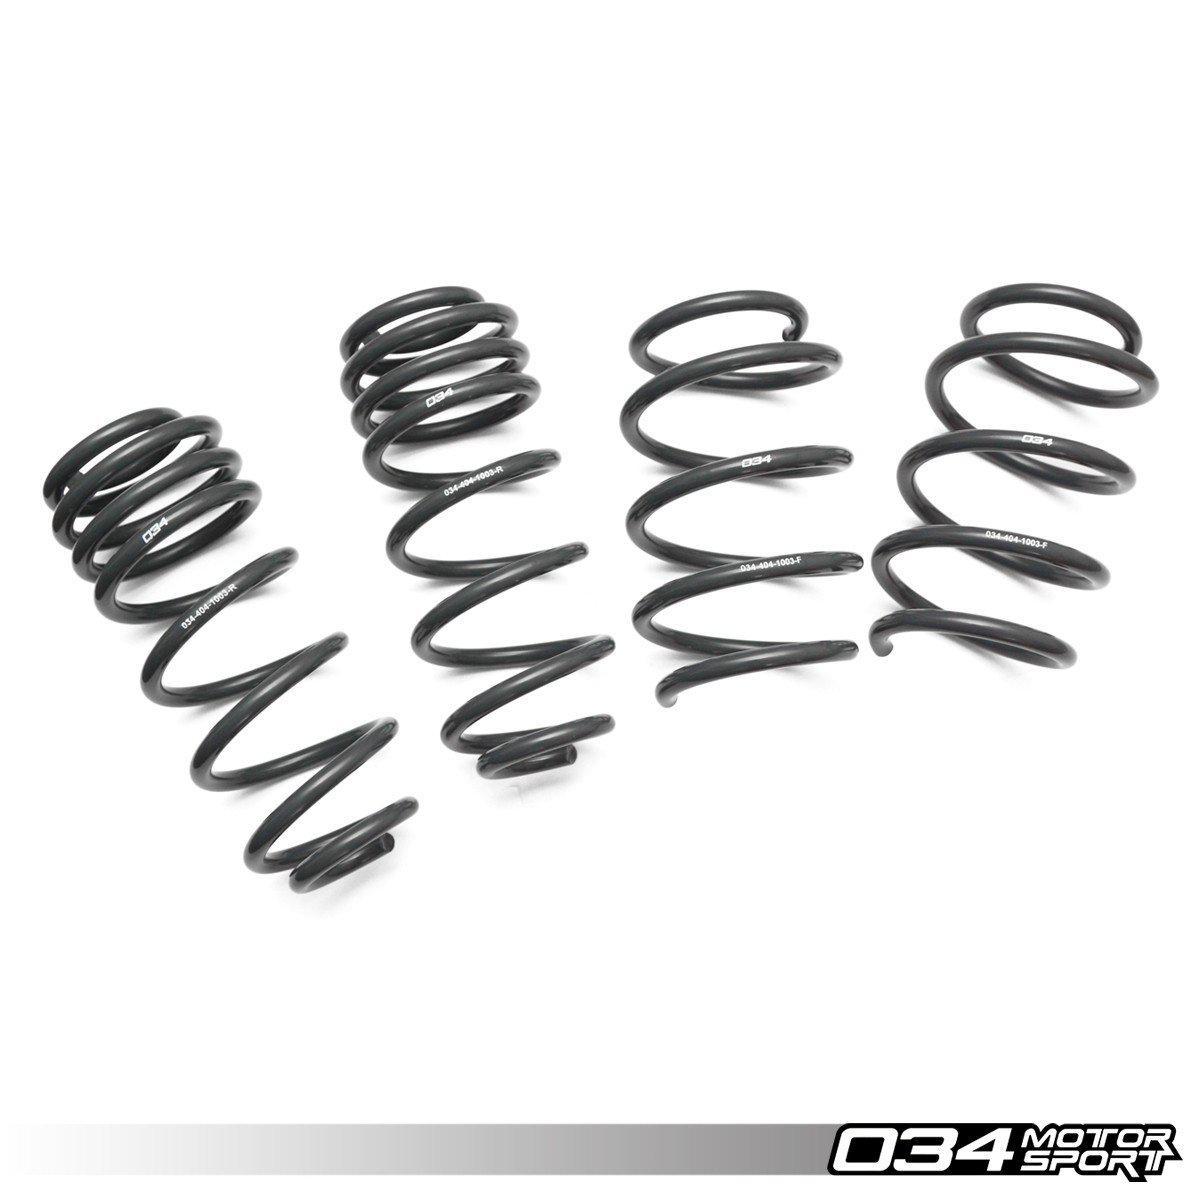 Dynamic+ Lowering Springs For MKVII Volkswagen Golf/GTI-A Little Tuning Co